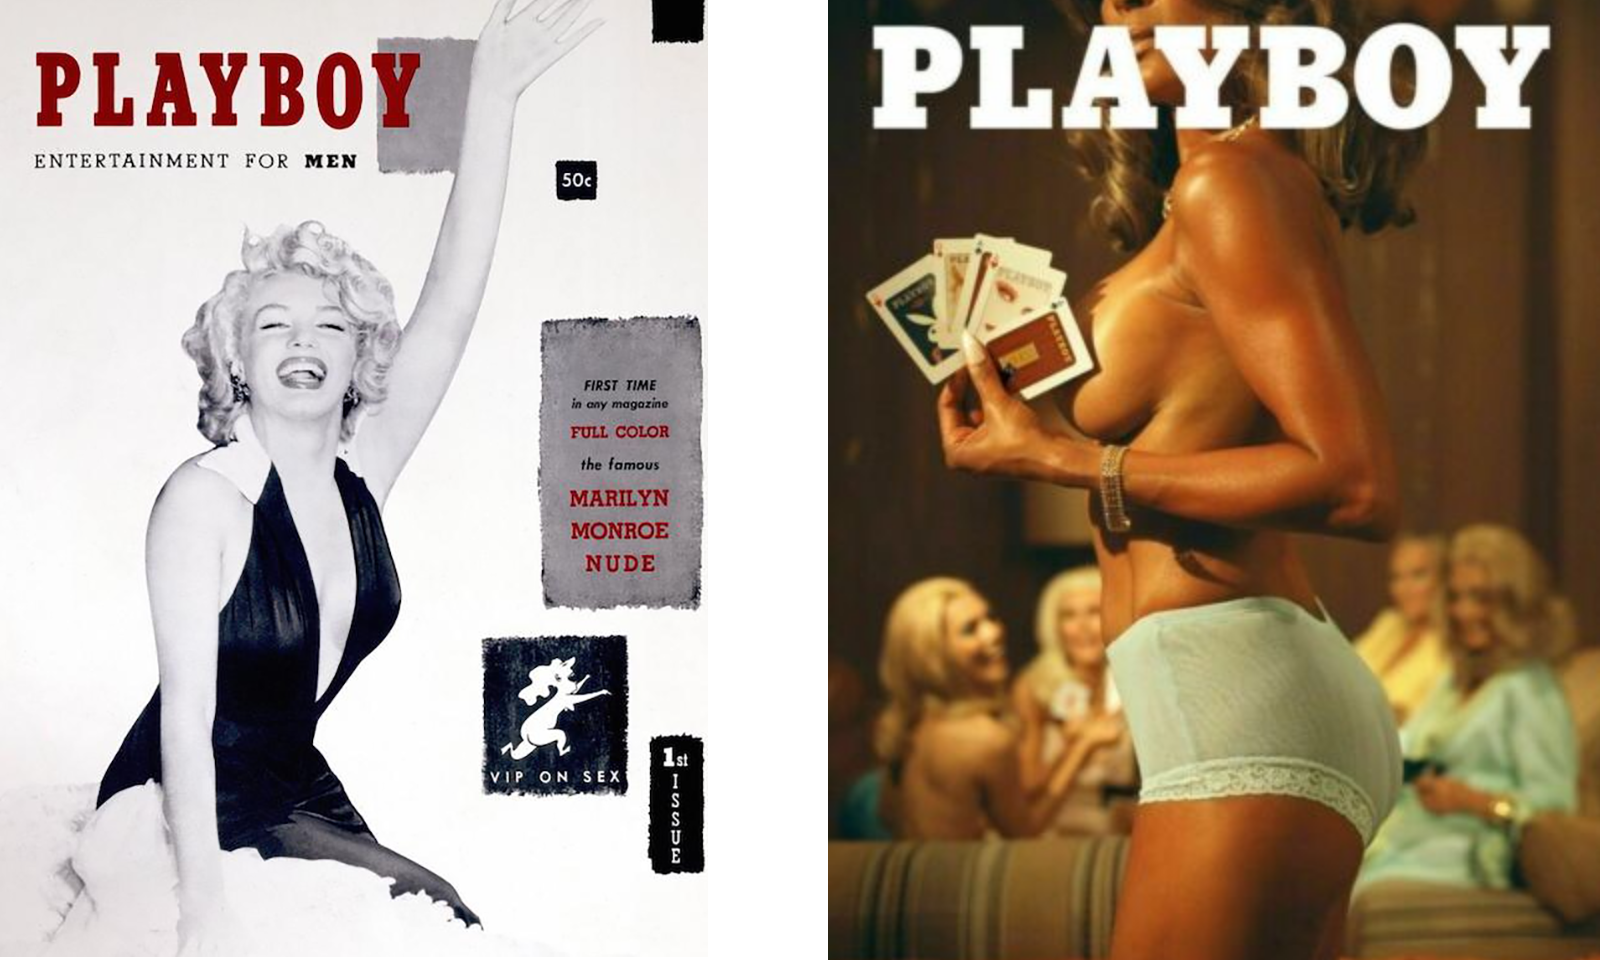 Playboy, World's Most Iconic Adult Magazine, Ceases Print Edition